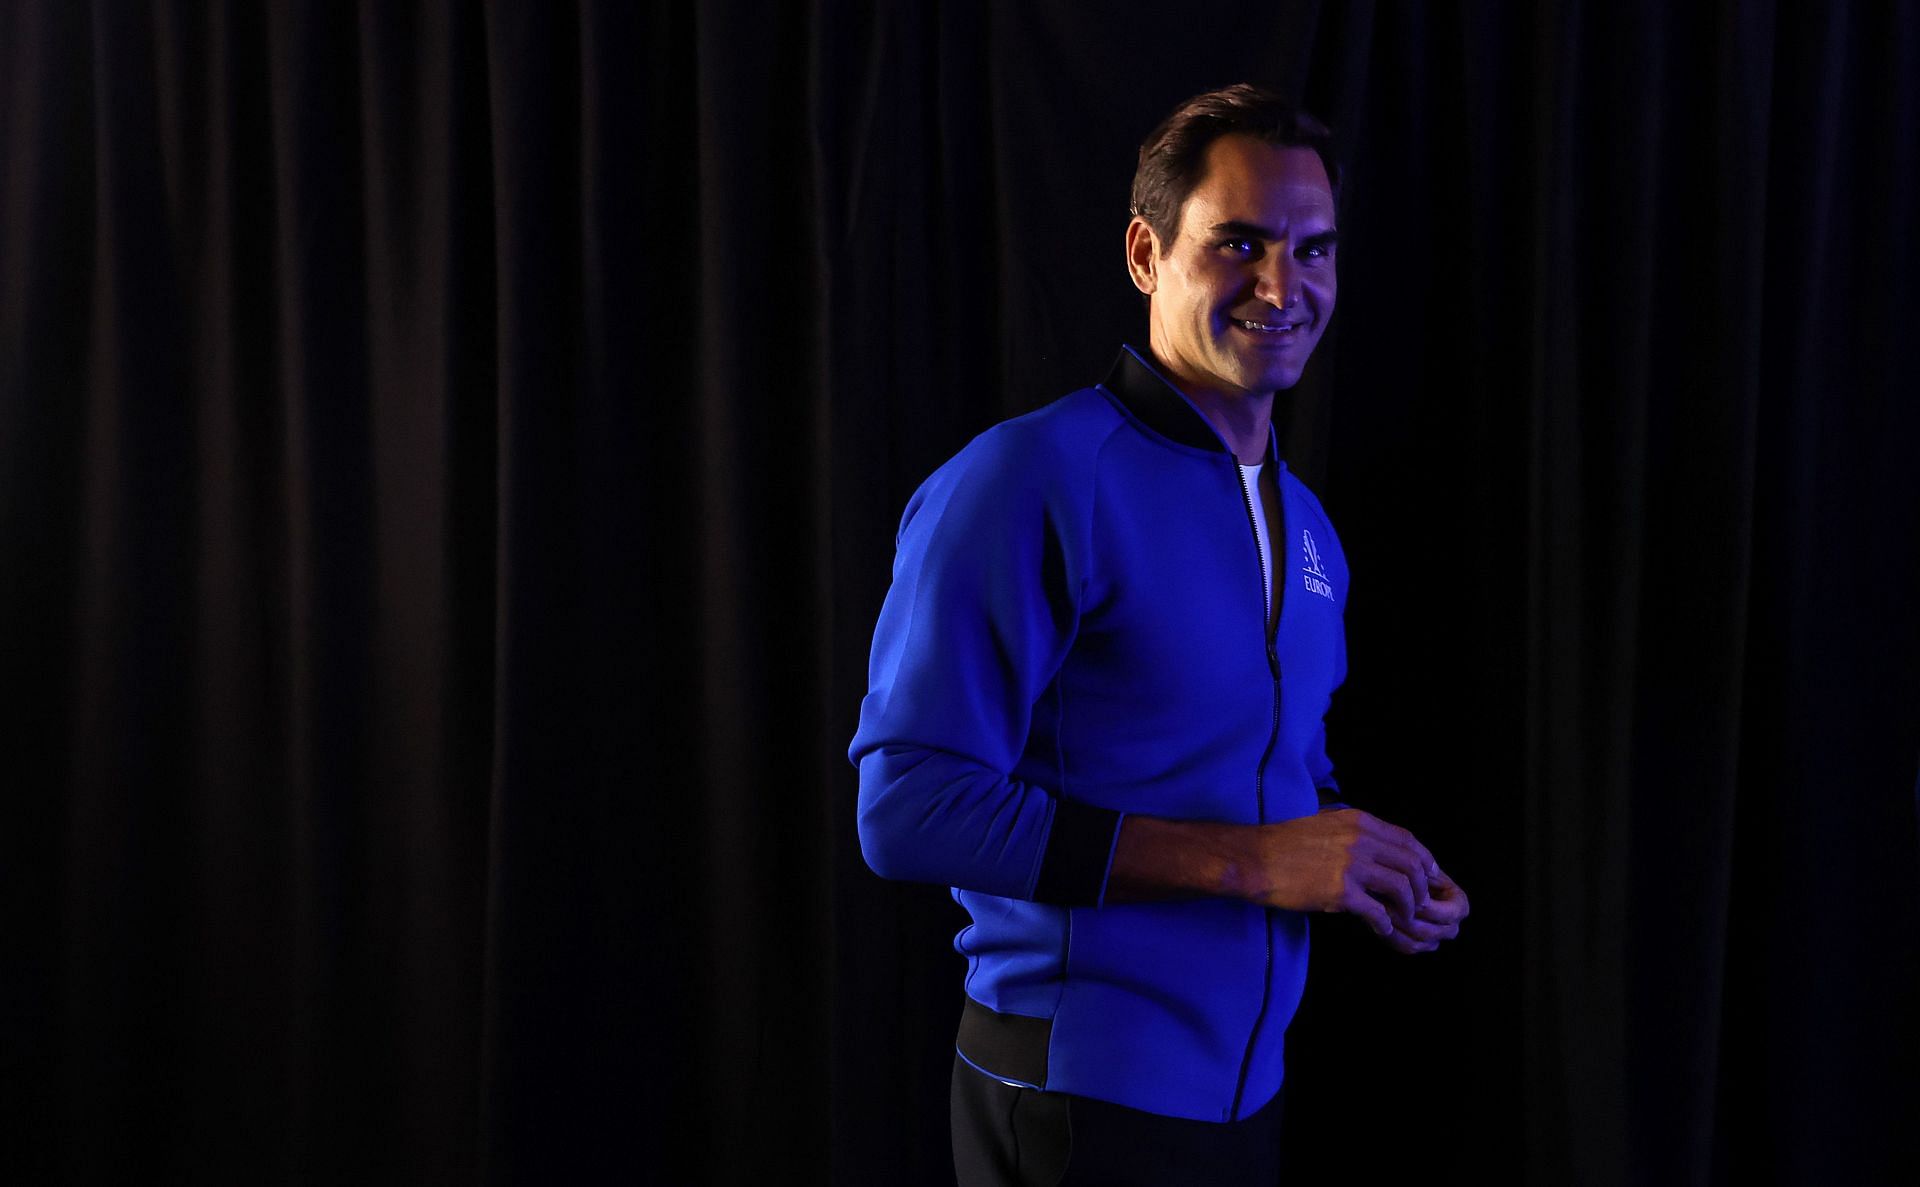 Roger Federer of Team Europe backstage ahead of Laver Cup 2022 - Day Three